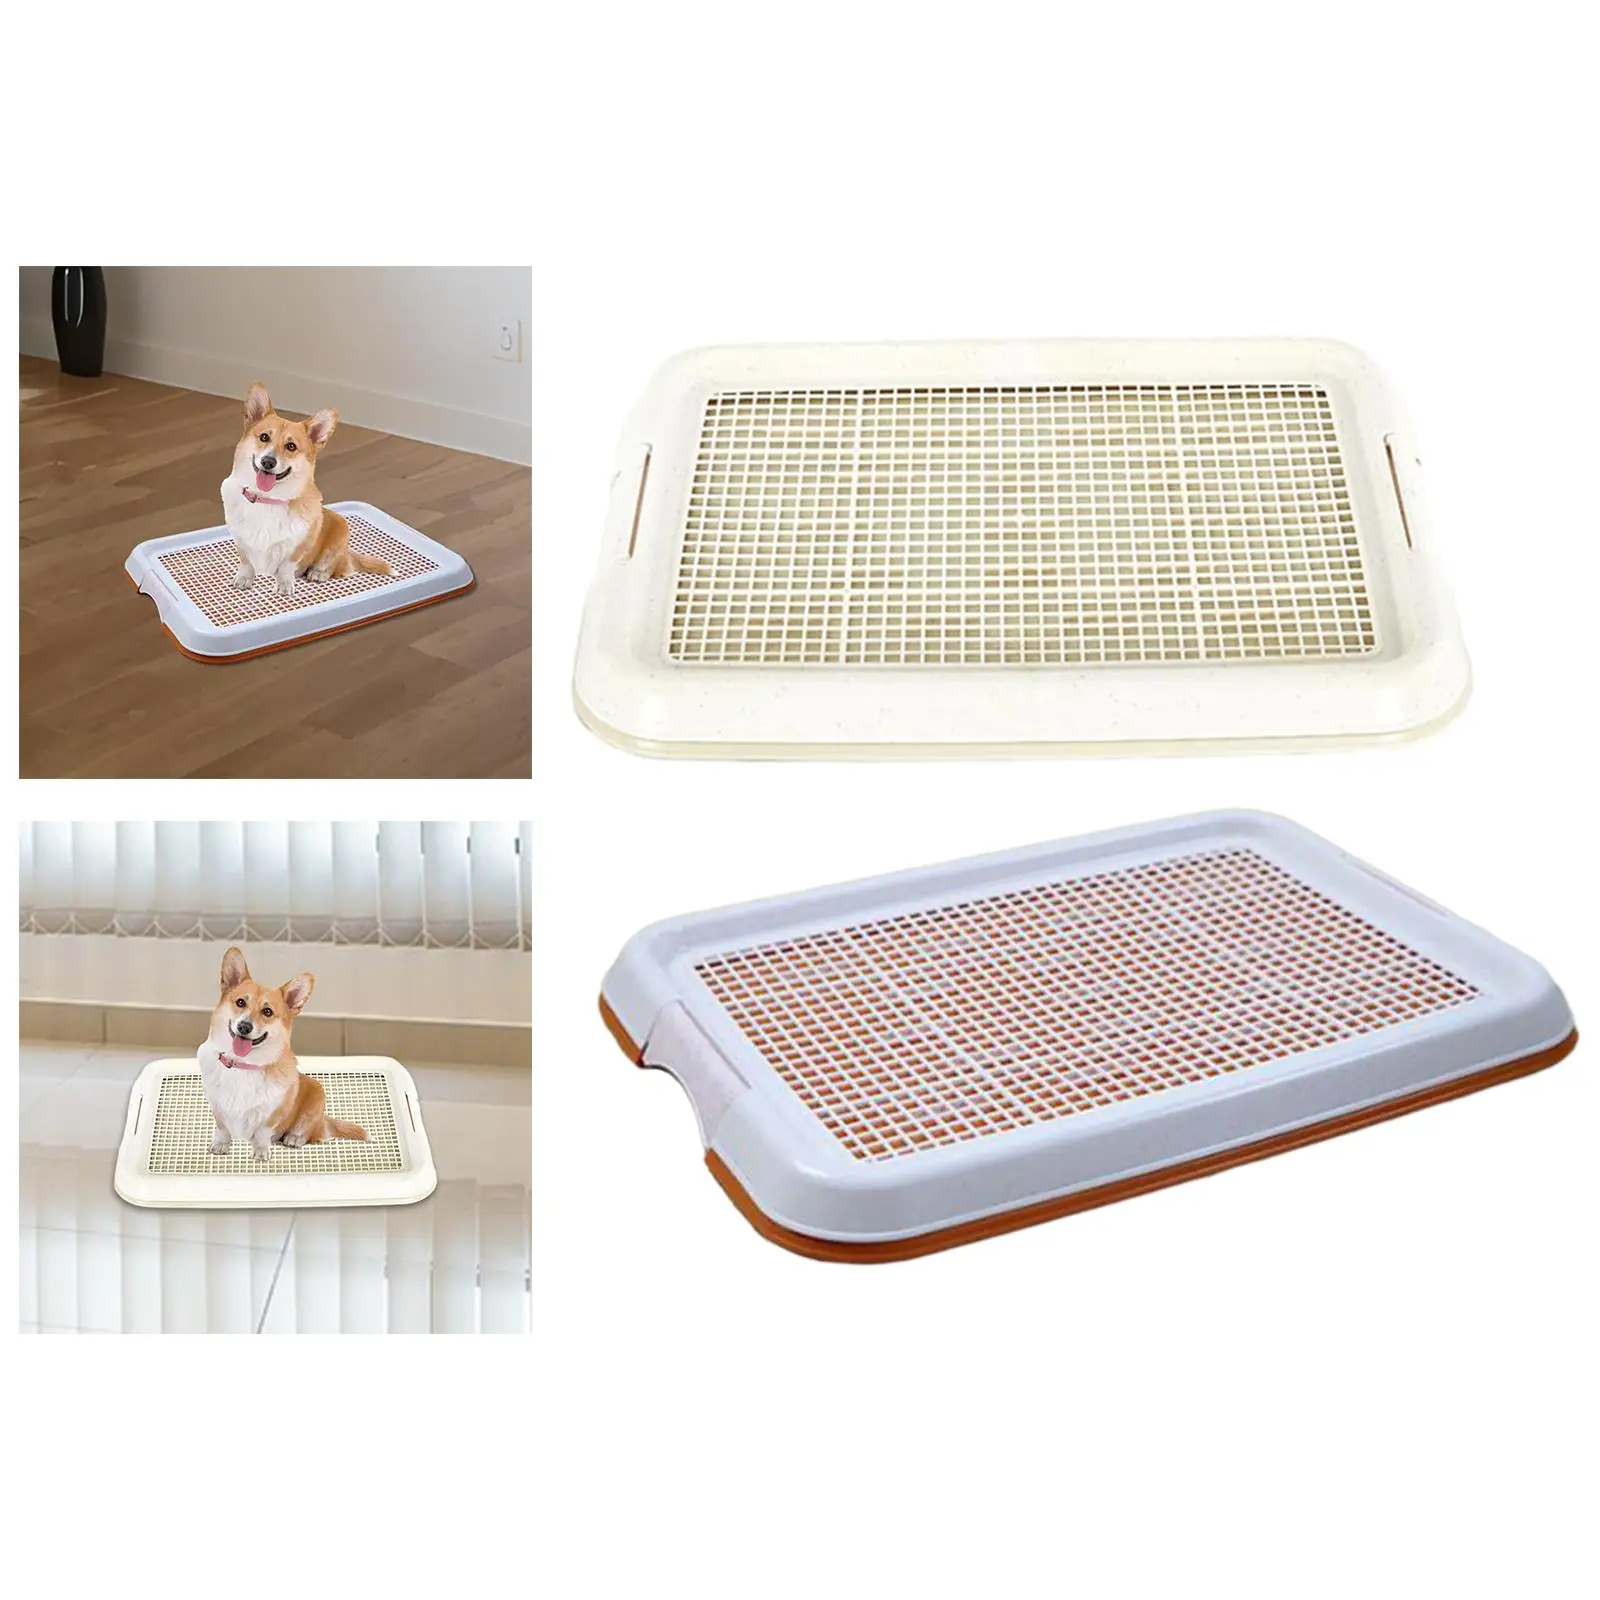 Dog Potty Toilet Training Tray Potty Trainer Easy to Clean 18.5x13.8 inch Dog